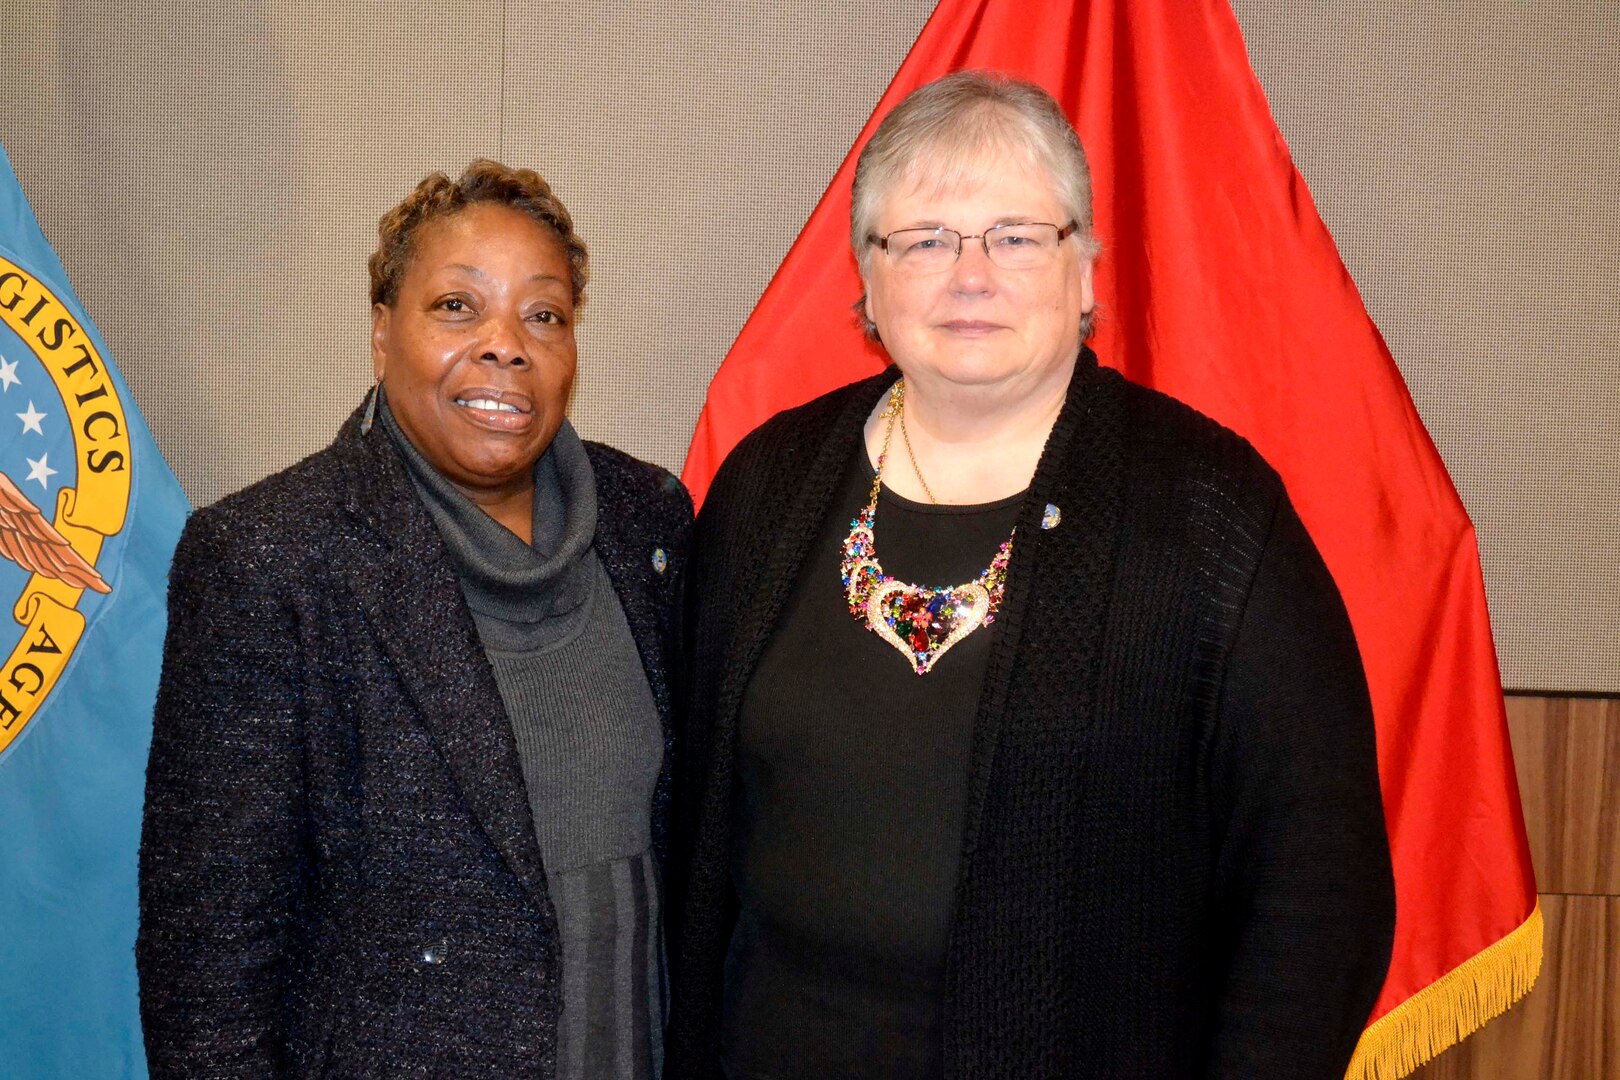 The Defense Logistics Agency Troop Support bid farewell to two civilian employees during a retirement ceremony November 25 in Philadelphia. Sheila Taylor, from Military Personnel, retired after 36 years of service. Carolyn Dempsey, who worked in the Subsistence supply chain, retired after serving 31 years.